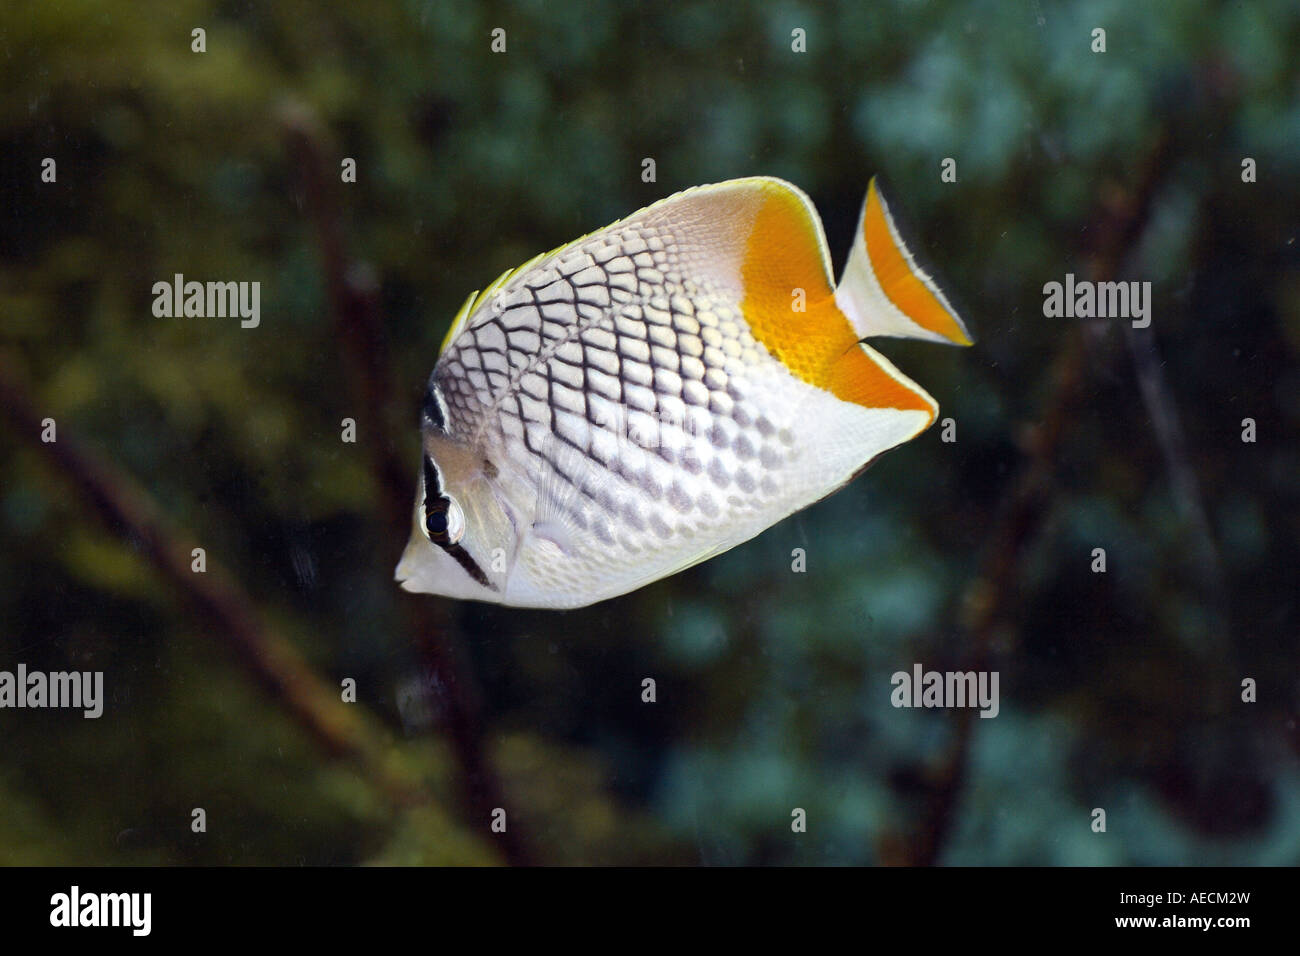 Pearlscale butterflyfish, Small butterfly fish (Chaetodon xanthurus) Stock Photo